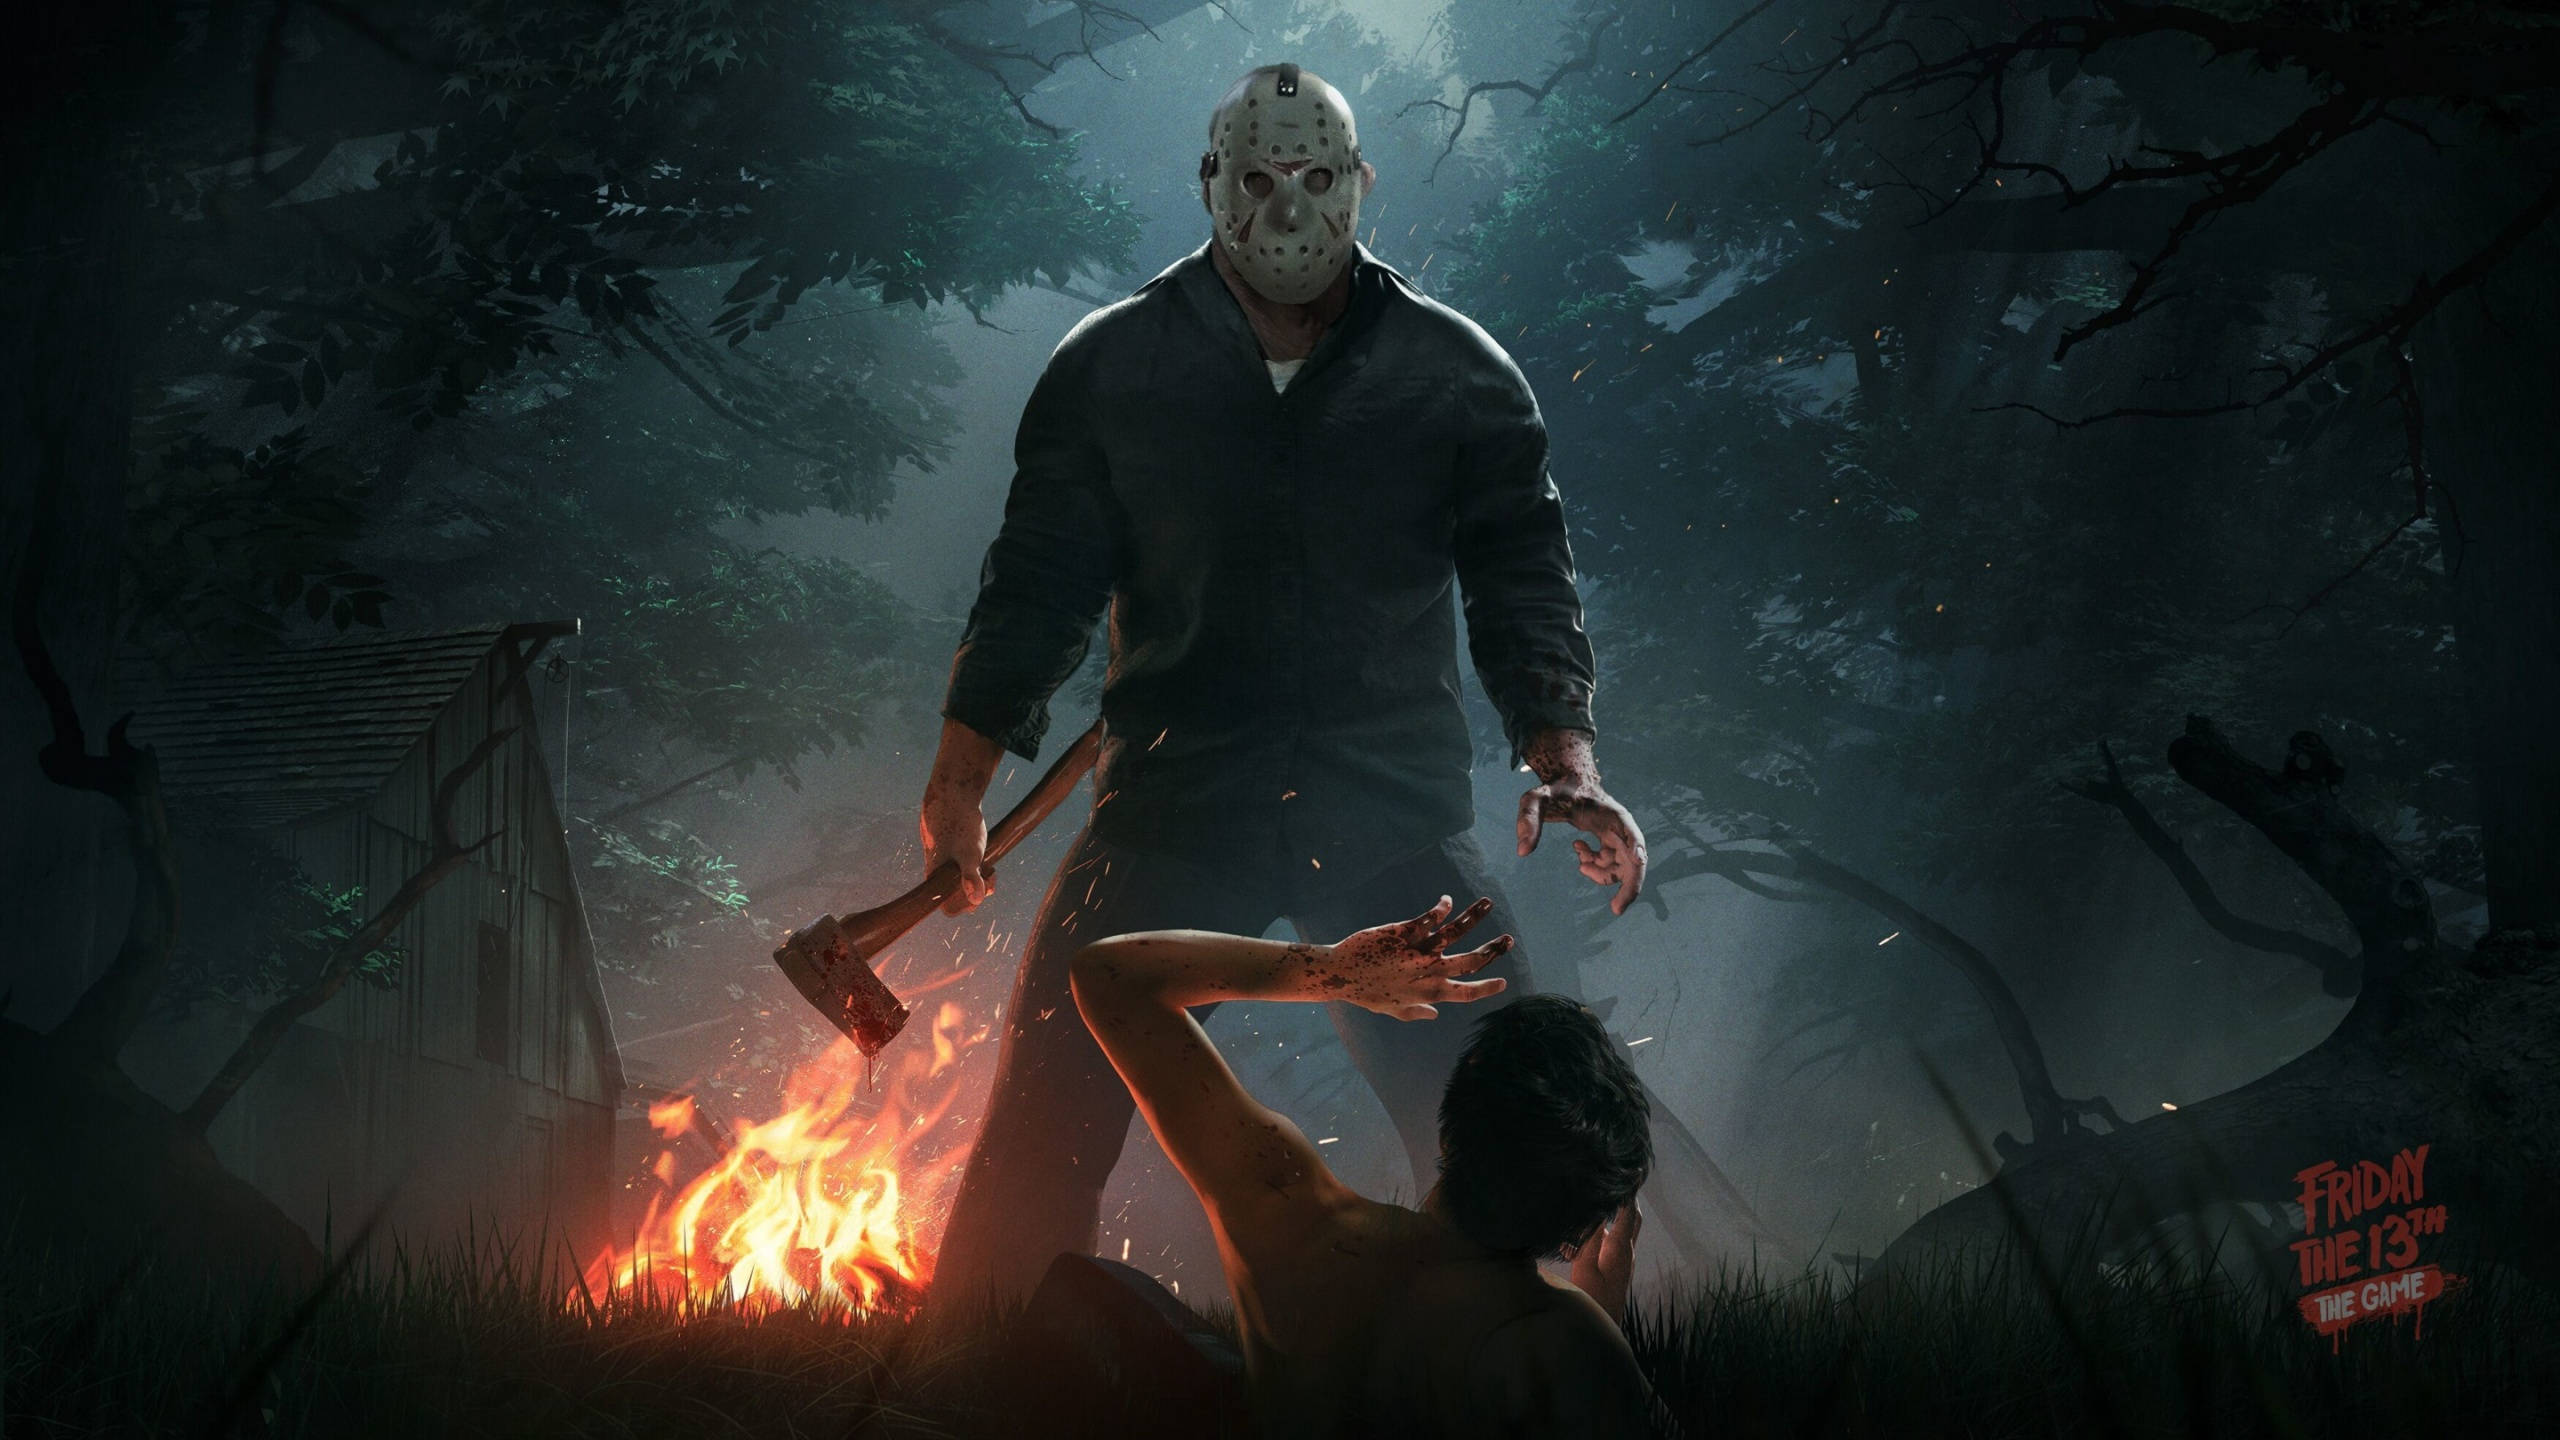 2560x1440 Gaming Friday The 13th Game